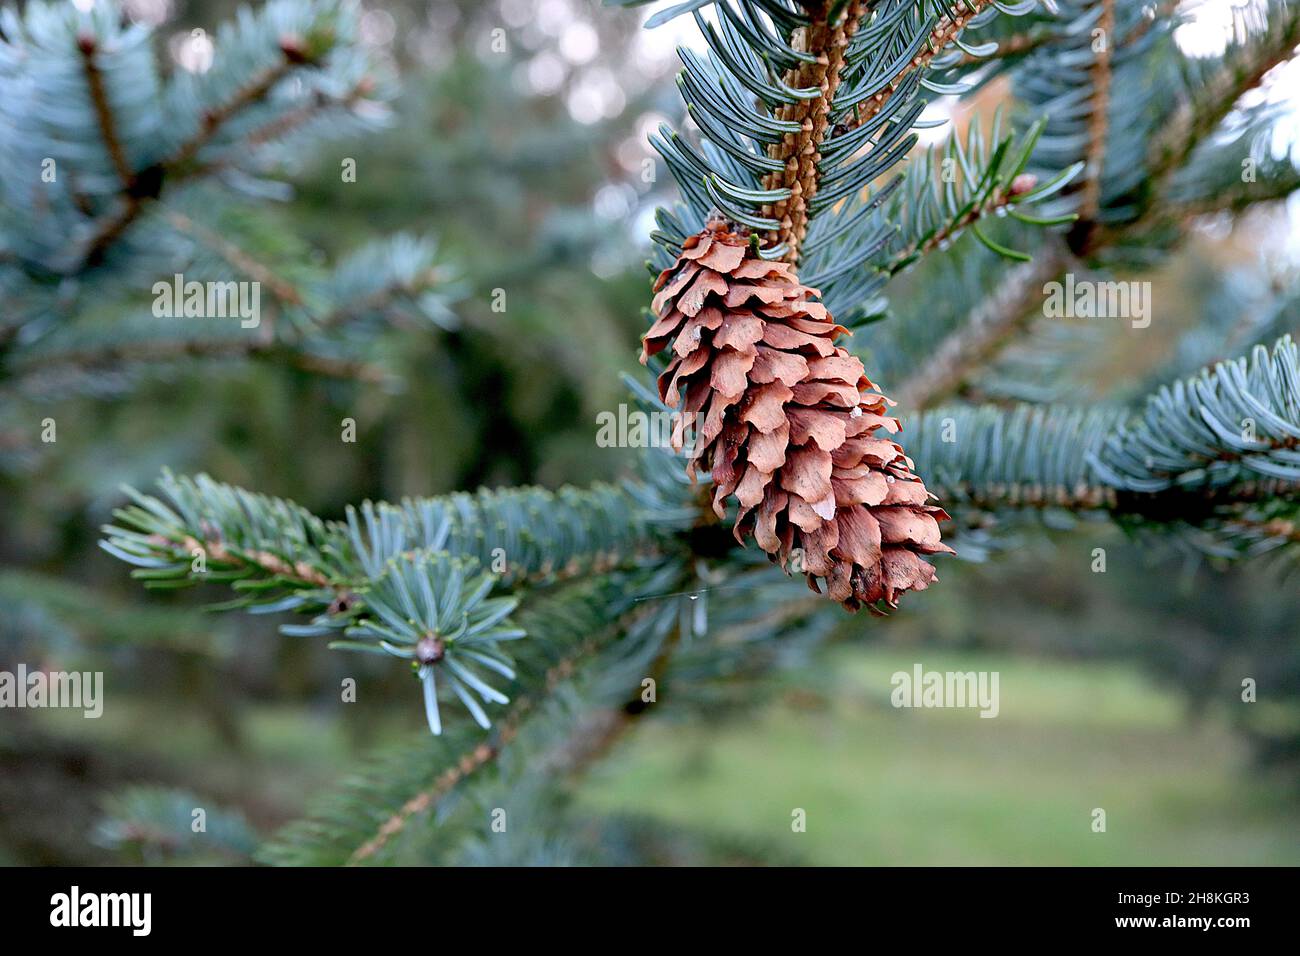 Picea glehnii Sakhalin spruce – oblong ovoid light brown cones with widely spaced scales, blue grey needle-like leaves,  November, England, UK Stock Photo